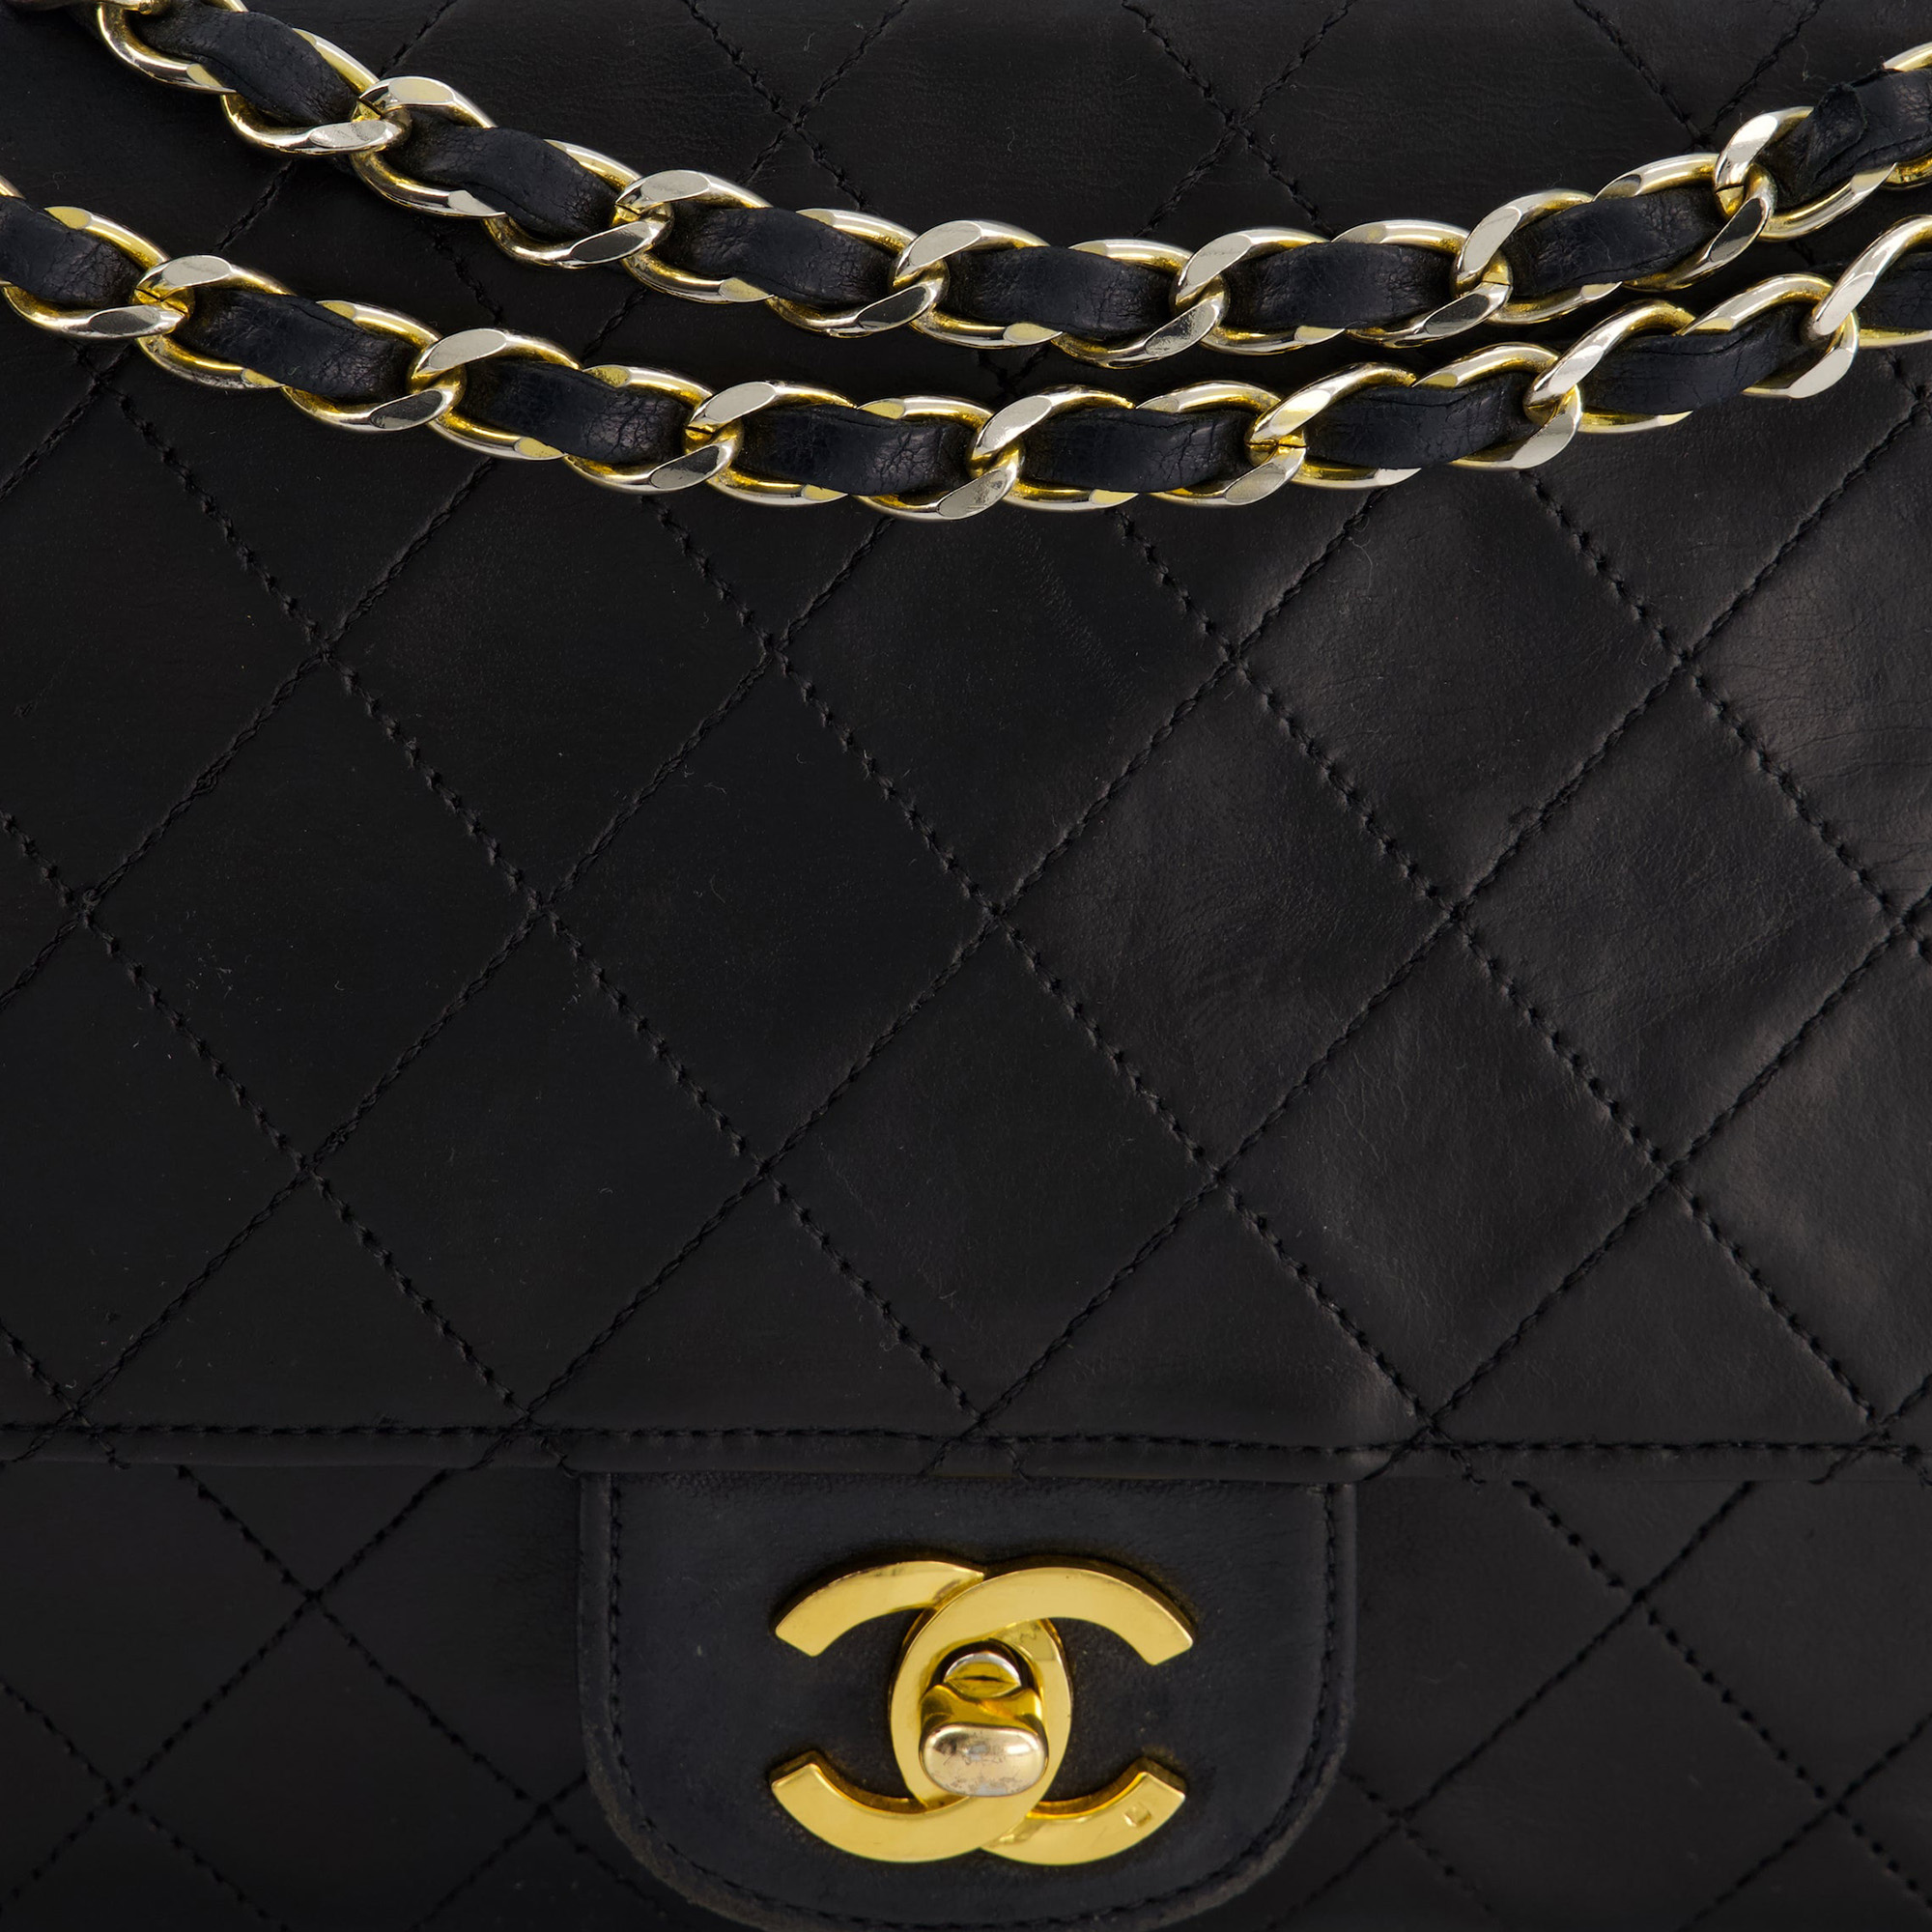 Chanel Black Vintage Classic Stitched Edge Medium Double Flap Bag In Lambskin Leather With 24k Gold Hardware